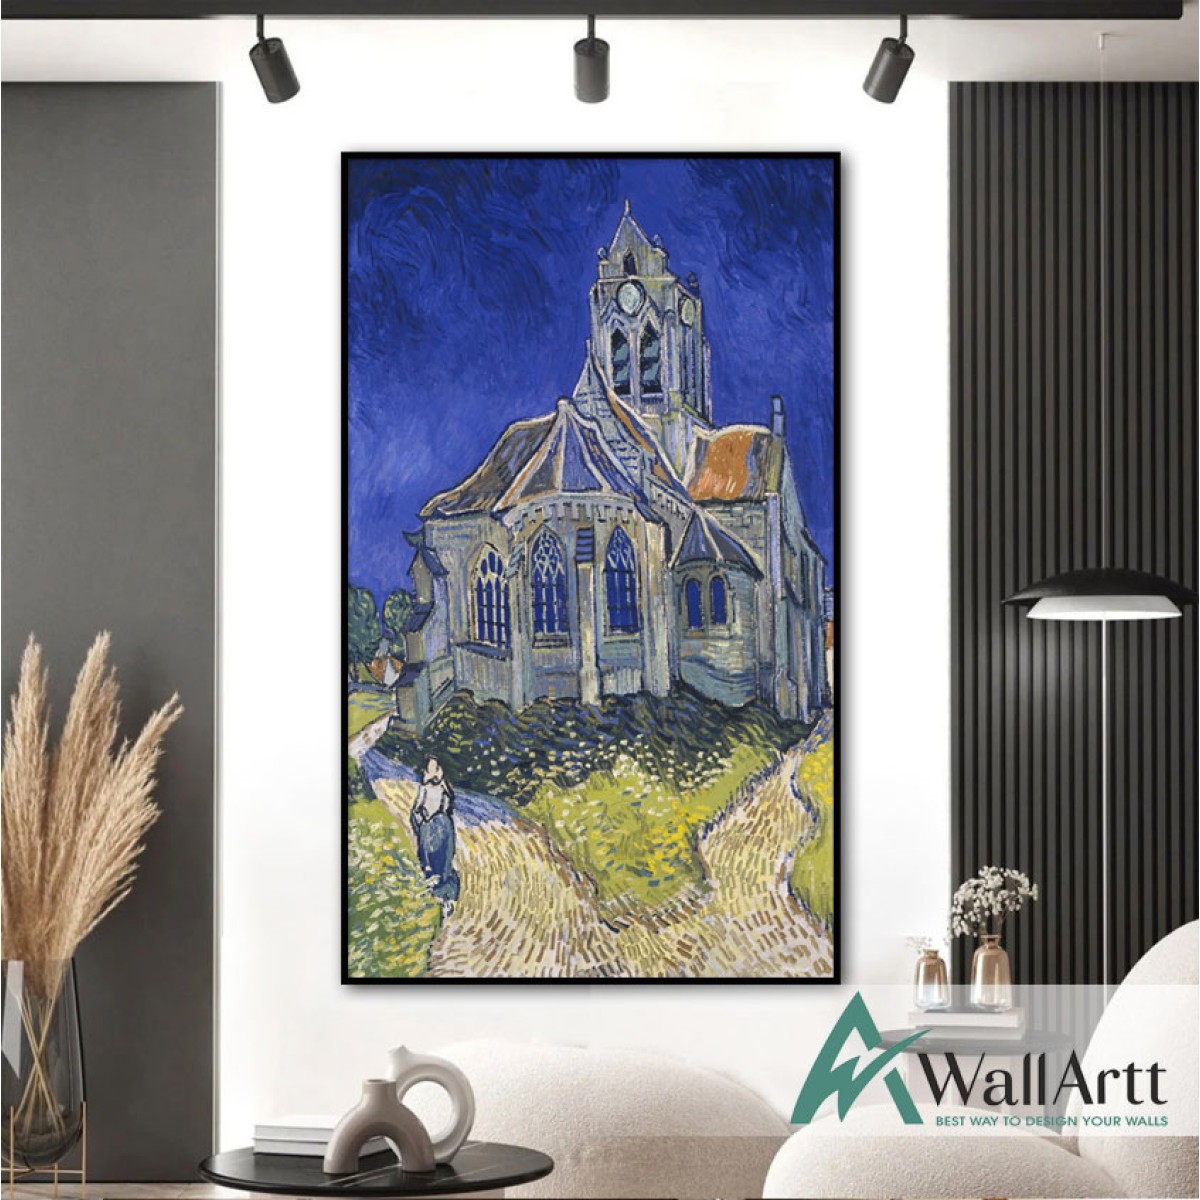 Vincent Van Gogh The Church at Auvers Textured Partial Oil Painting